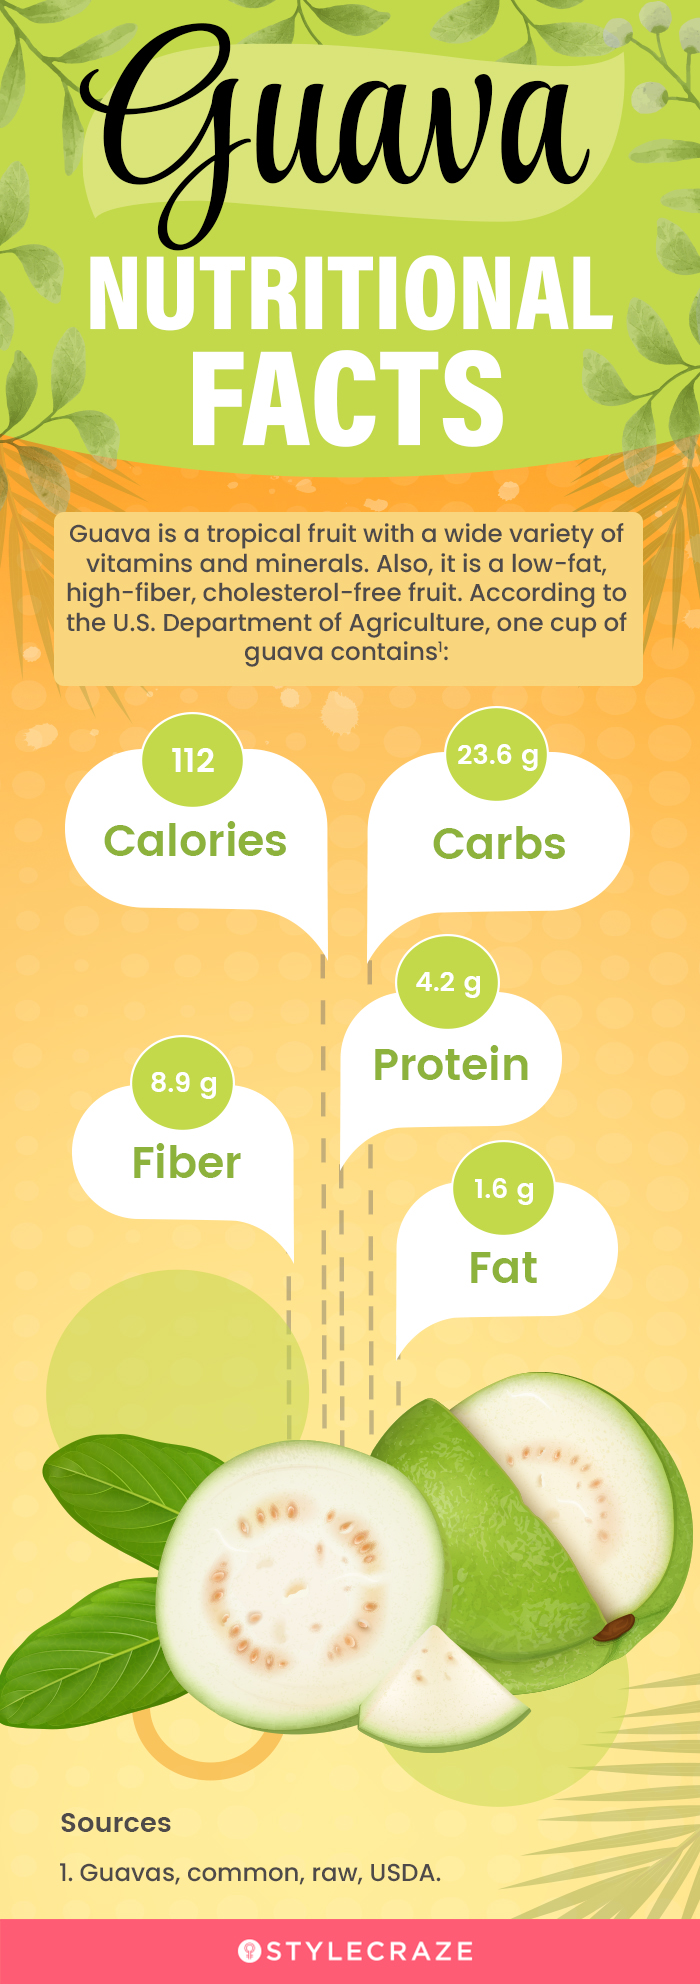 guava nutritional facts (infographic)